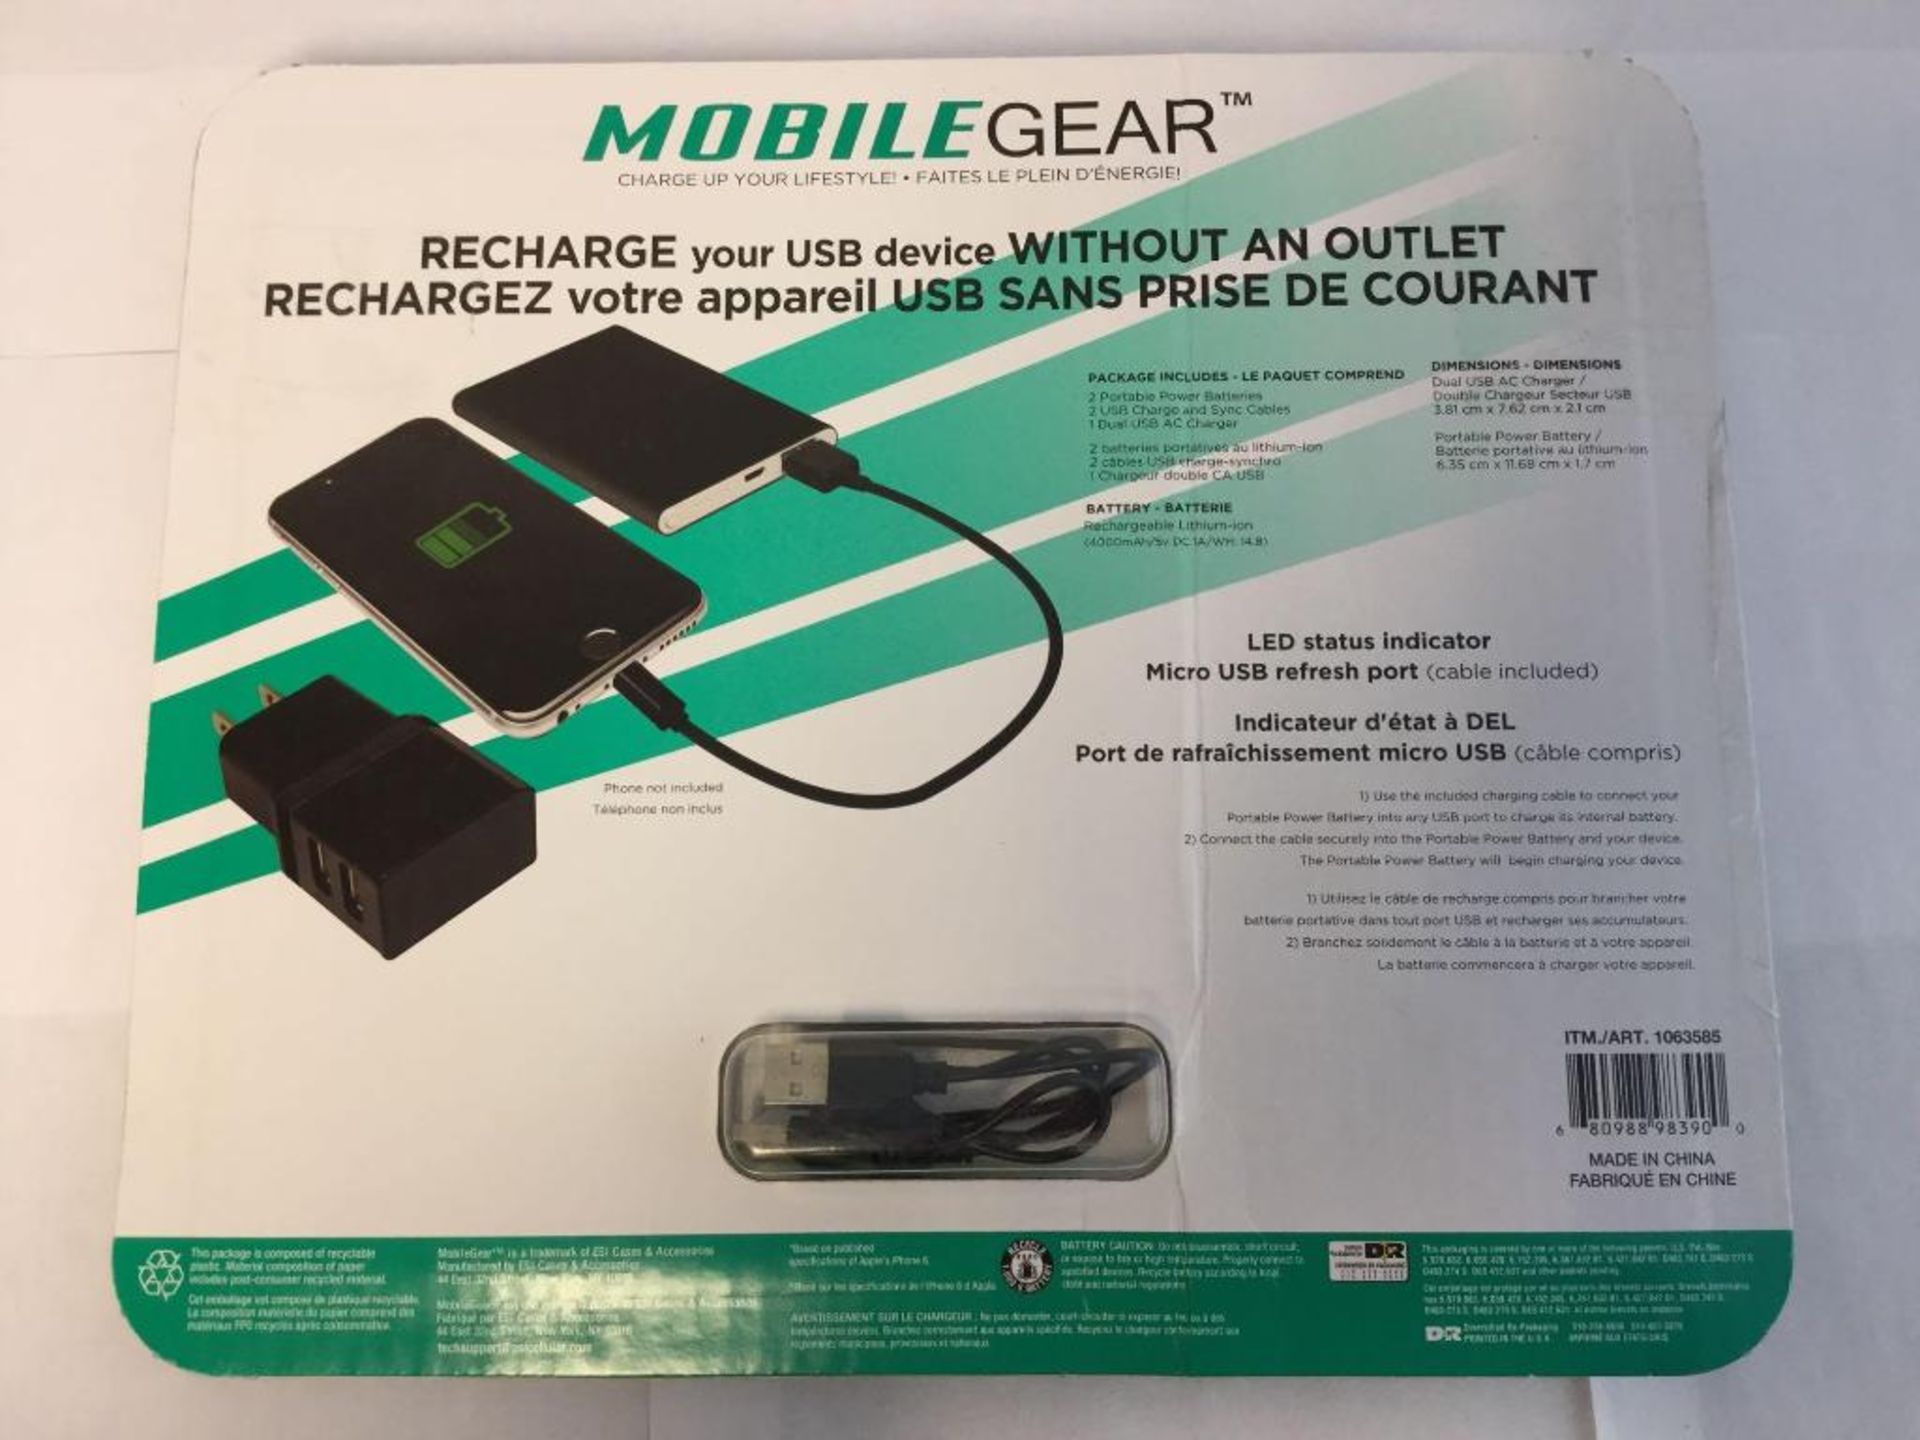 Mobile Gear Portable Power Bank 4000 MAH 2-Pack - Image 2 of 2